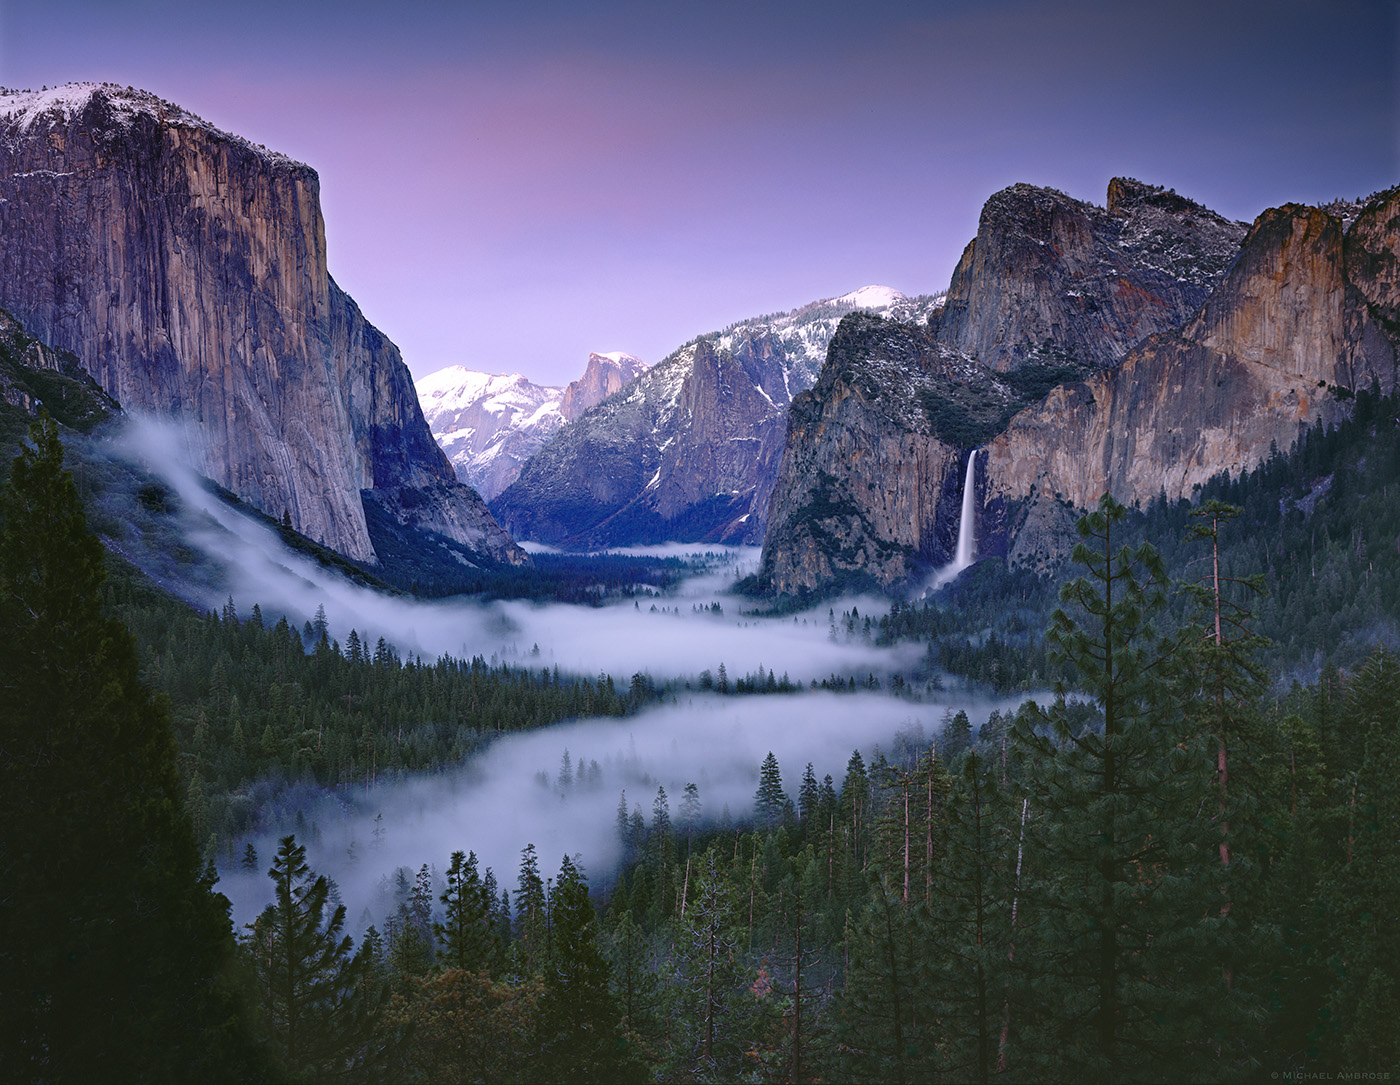 Yosemite Valley from Tunnel View featuring Bridalveil Falls, Half Dome, El Capitan, Clouds rest, Sentinel Rock, Sentinel Dome and The Cathedral Rocks. 